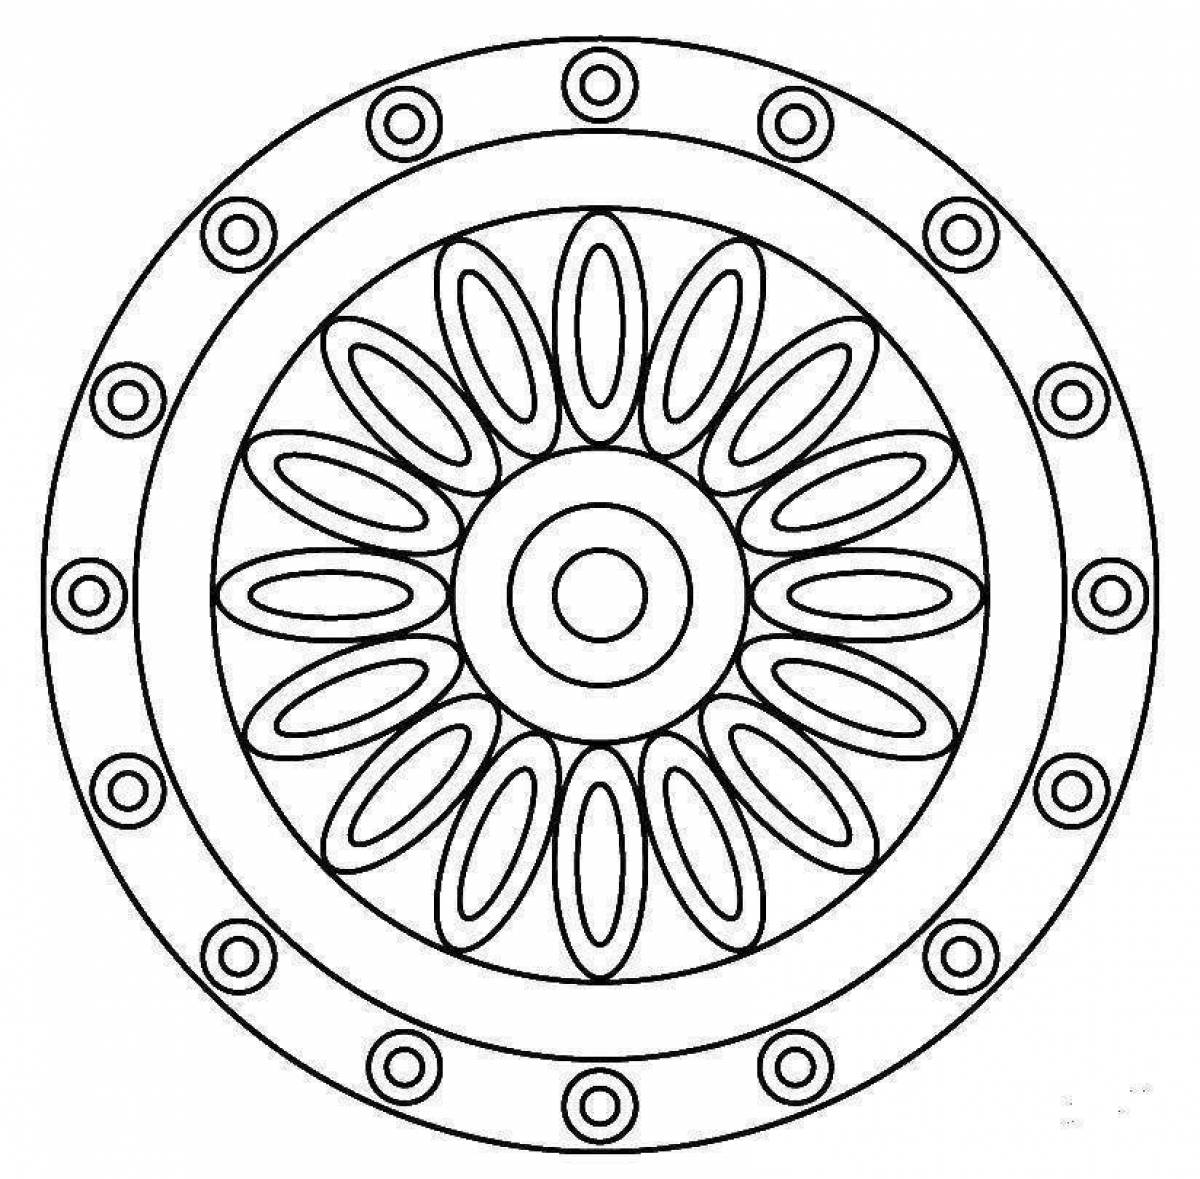 Colored saucer coloring page